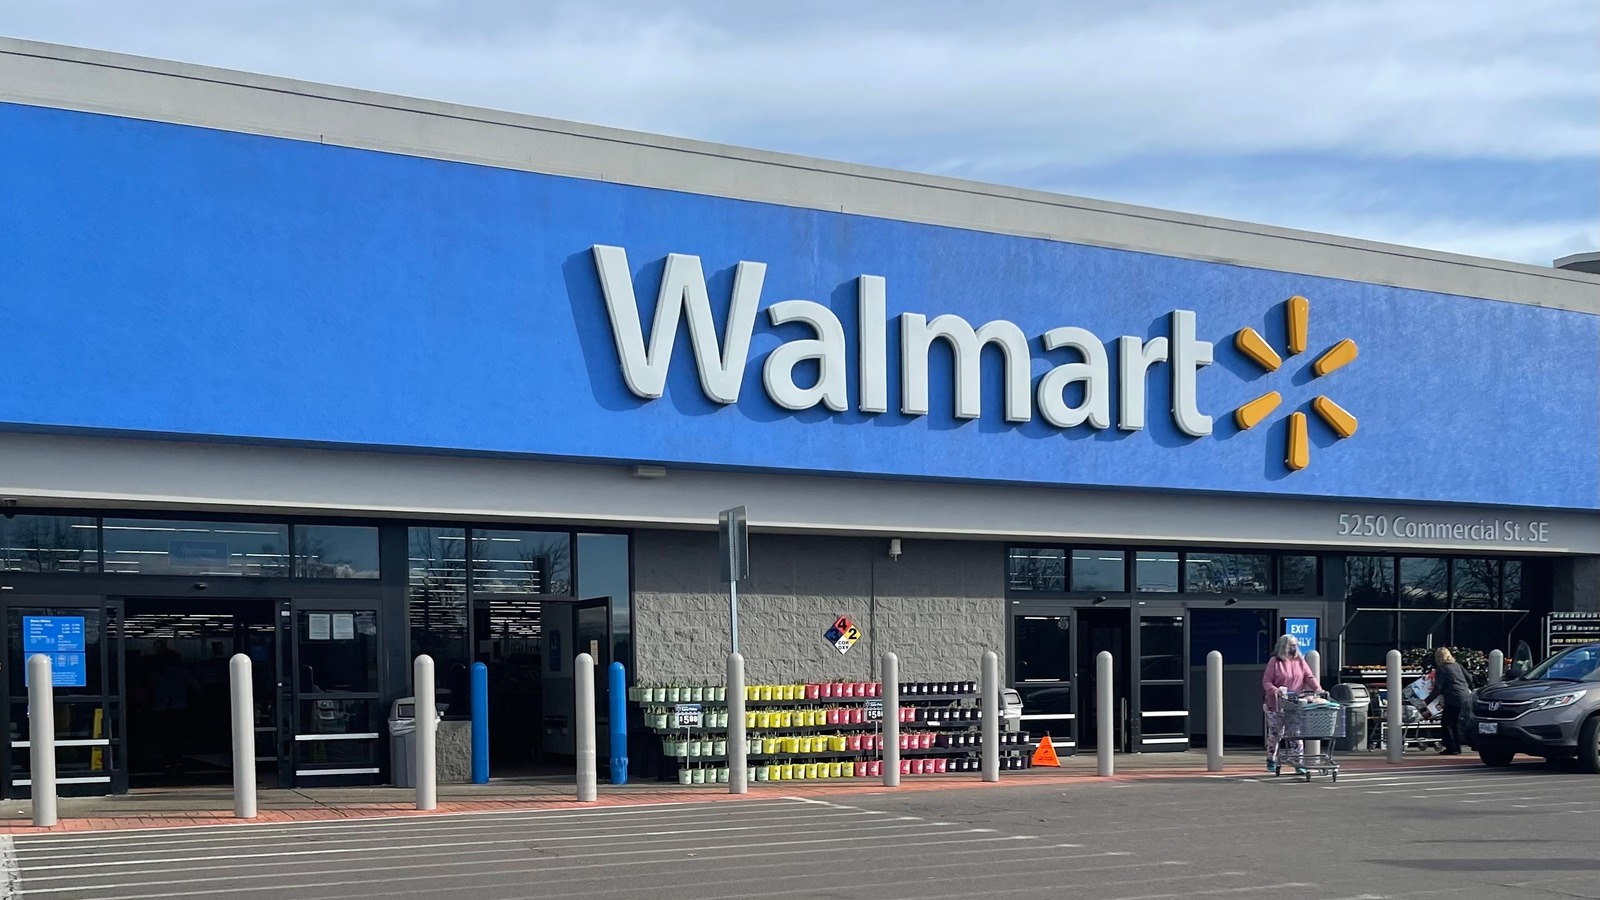 The Best Day of the Week To Shop at Walmart